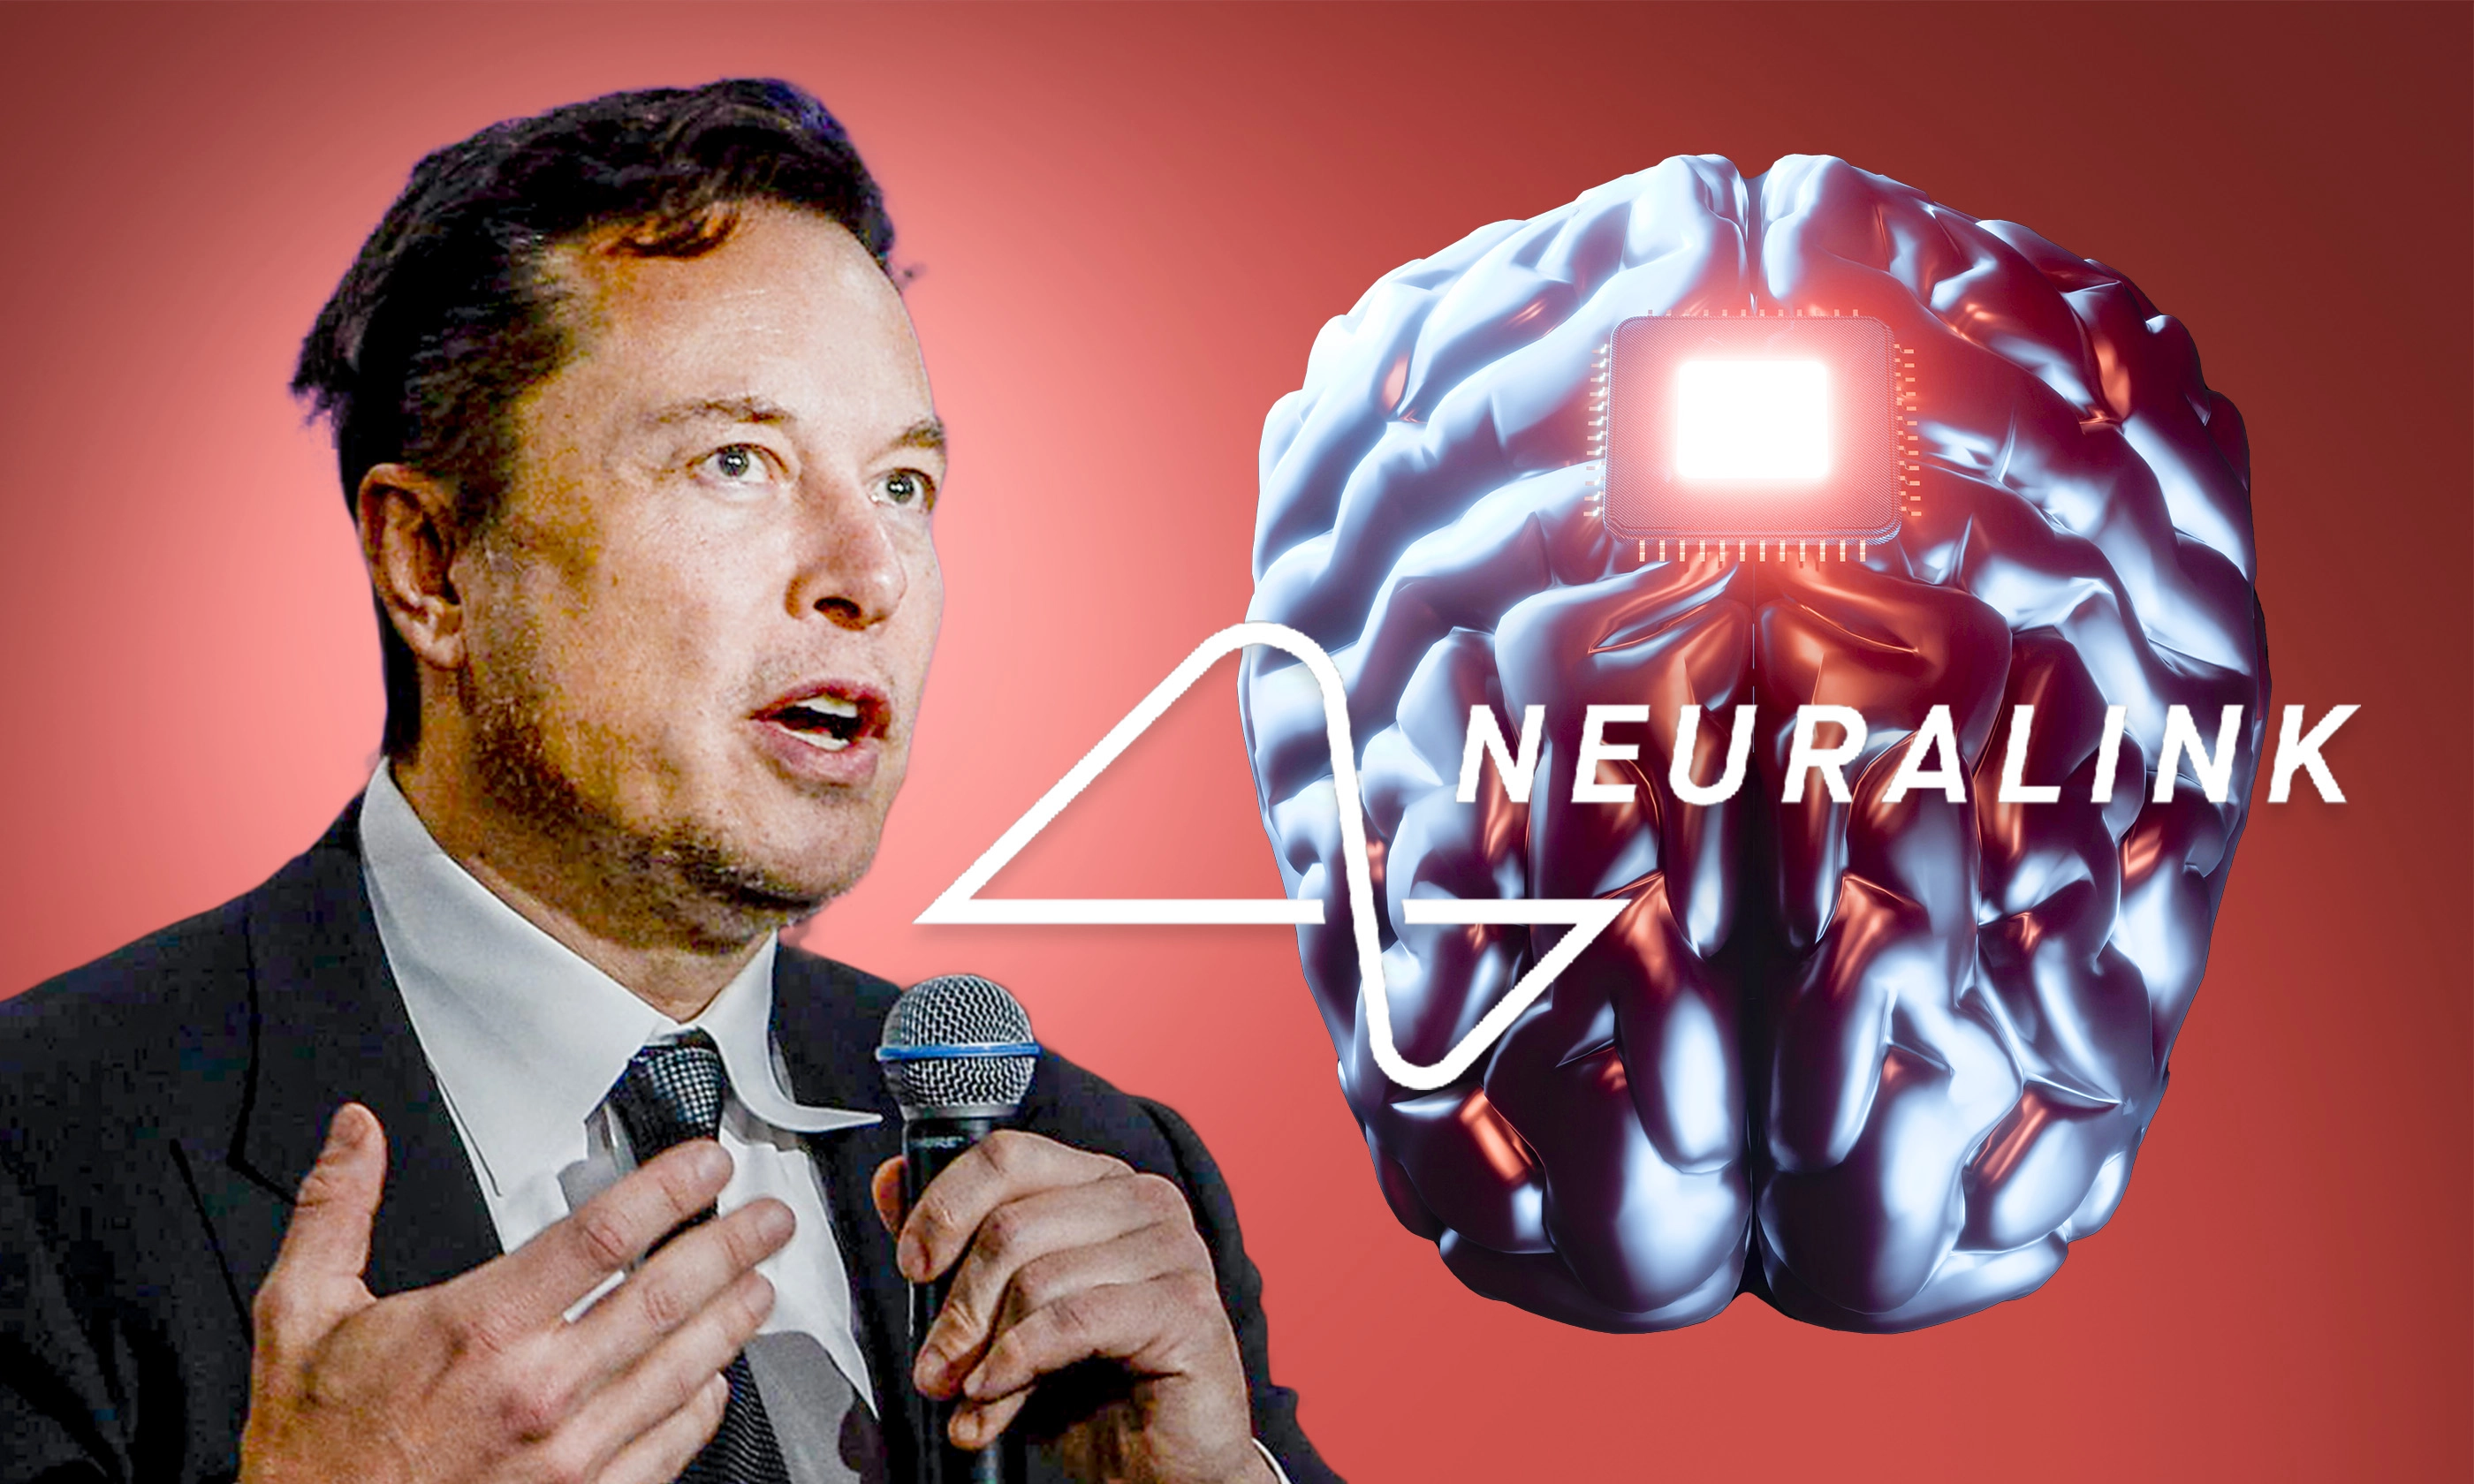 Ethical Considerations Surrounding Neuralink's Human Testing and Brain Implants